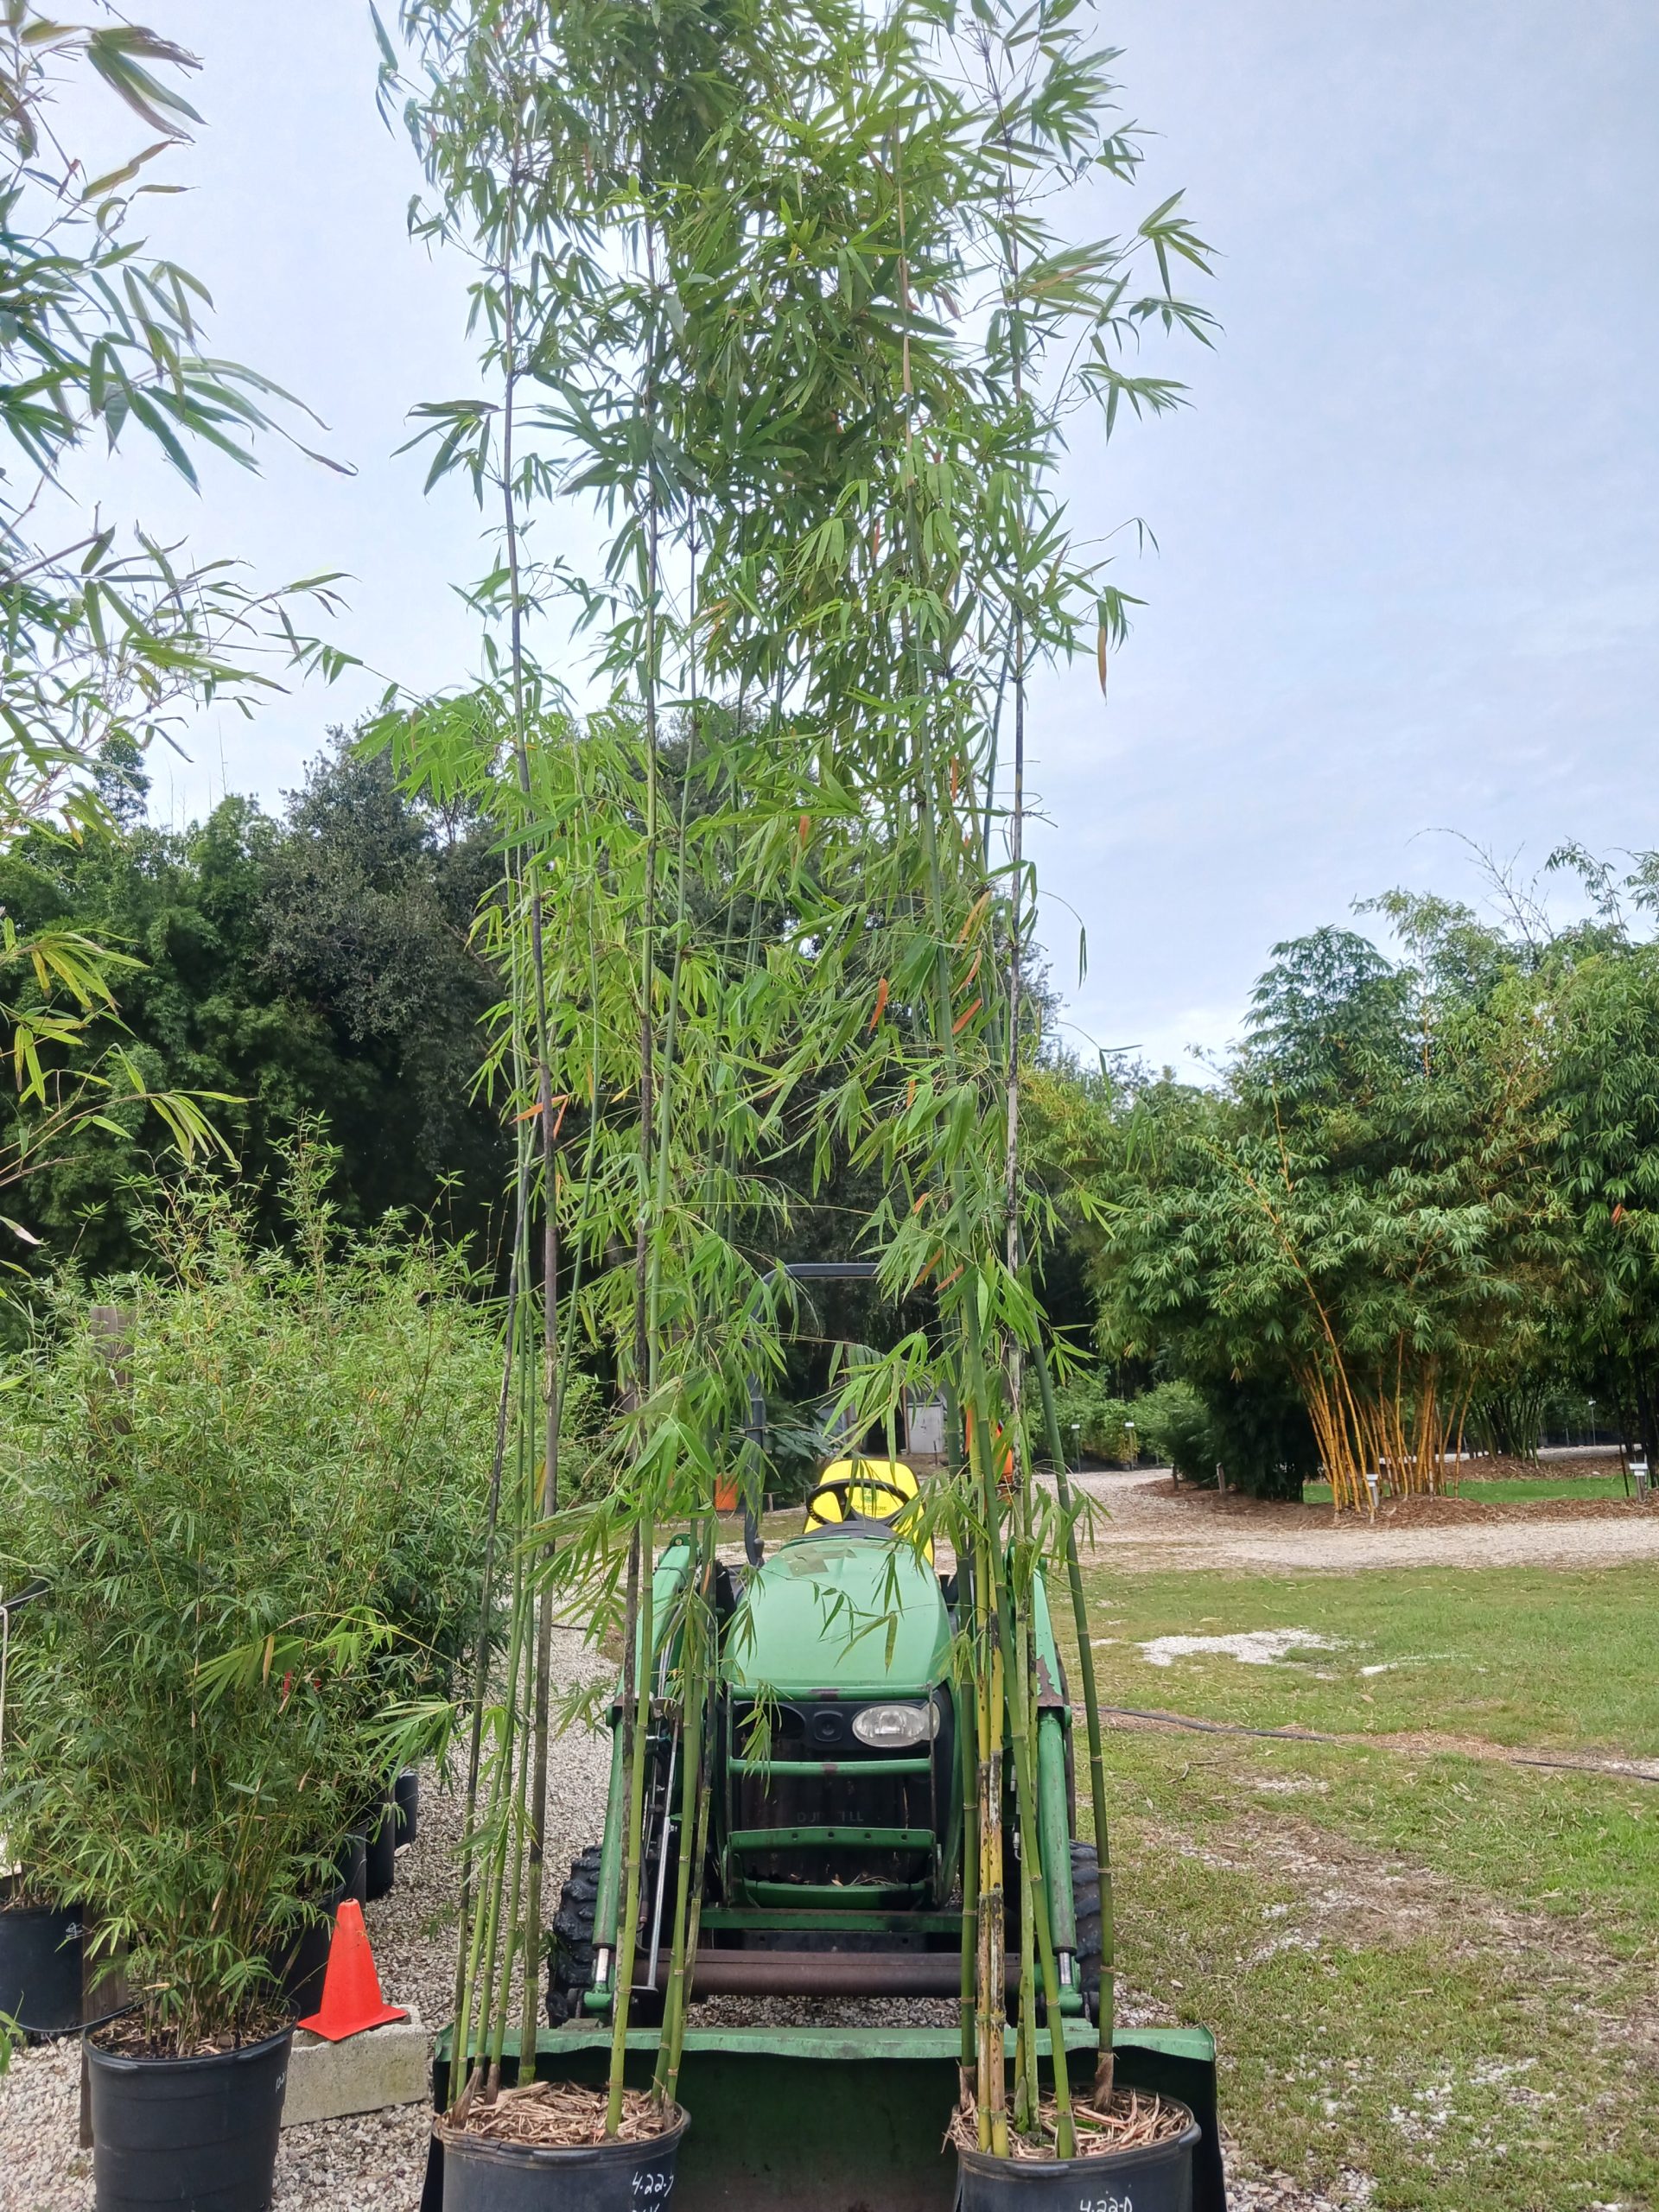 Bamboo Poles and Products  Bamboo from Florida for Privacy & Beauty.  Fast-Growing, Non-Invasive Florida grown Clump and Running Bamboos, near  Orlando, Florida